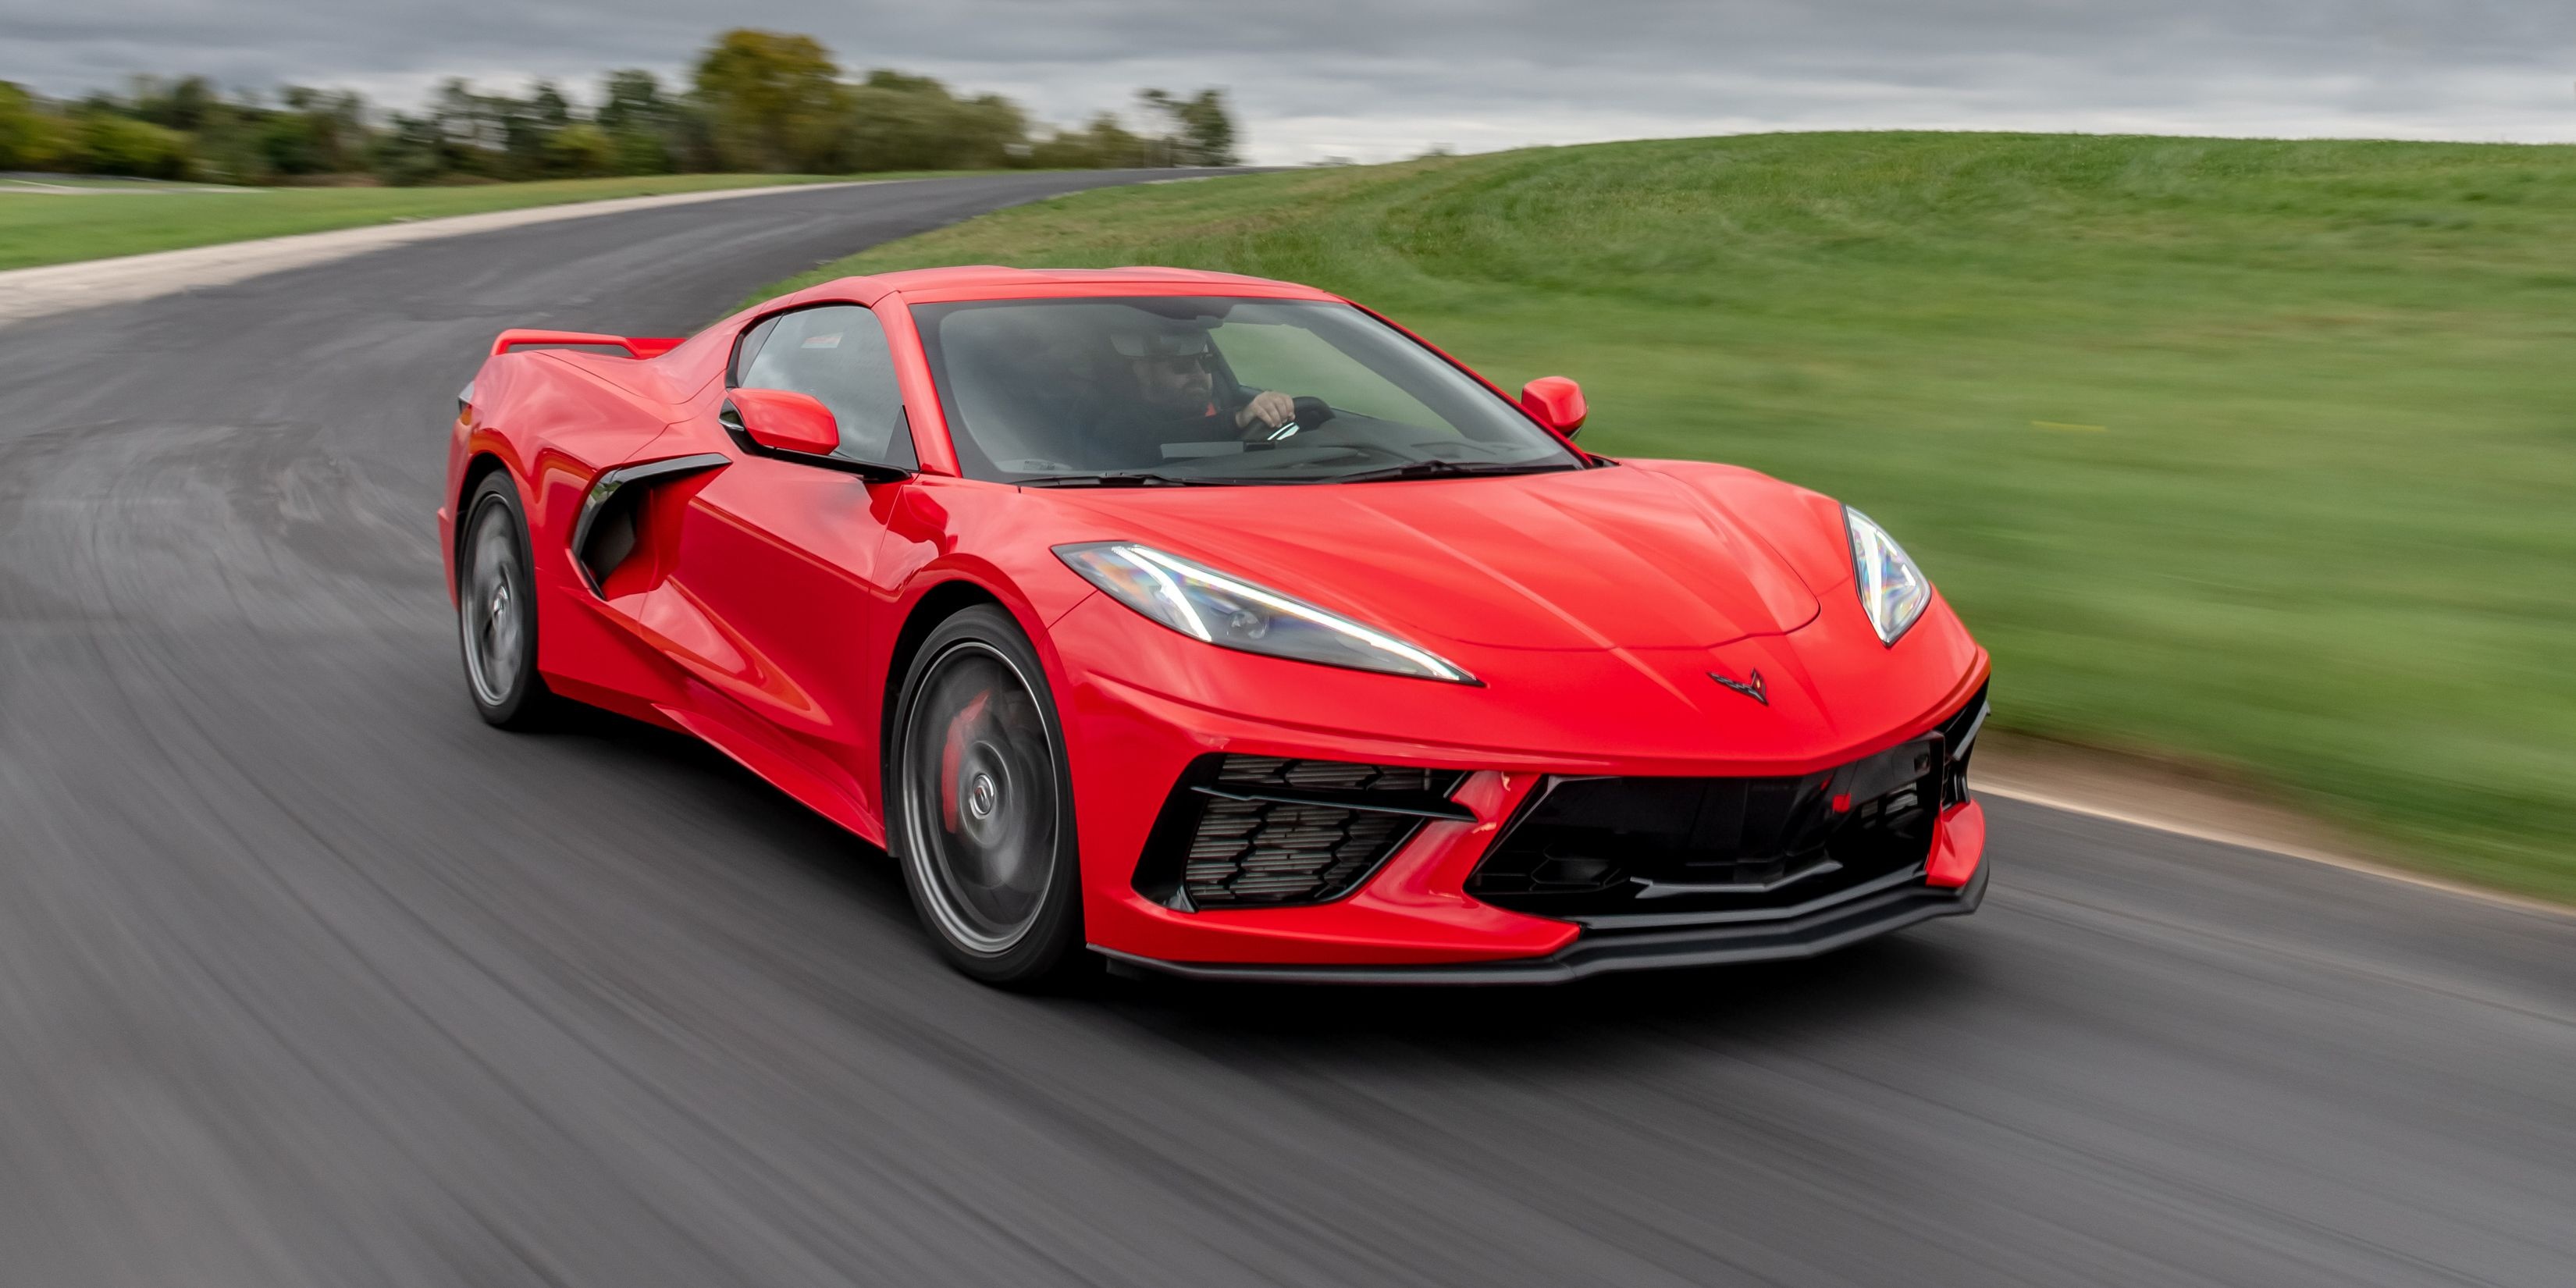 Corvette: 2020 mid-engined C8 Stingray, A high-performance production car, An American sports car. 3300x1650 Dual Screen Wallpaper.